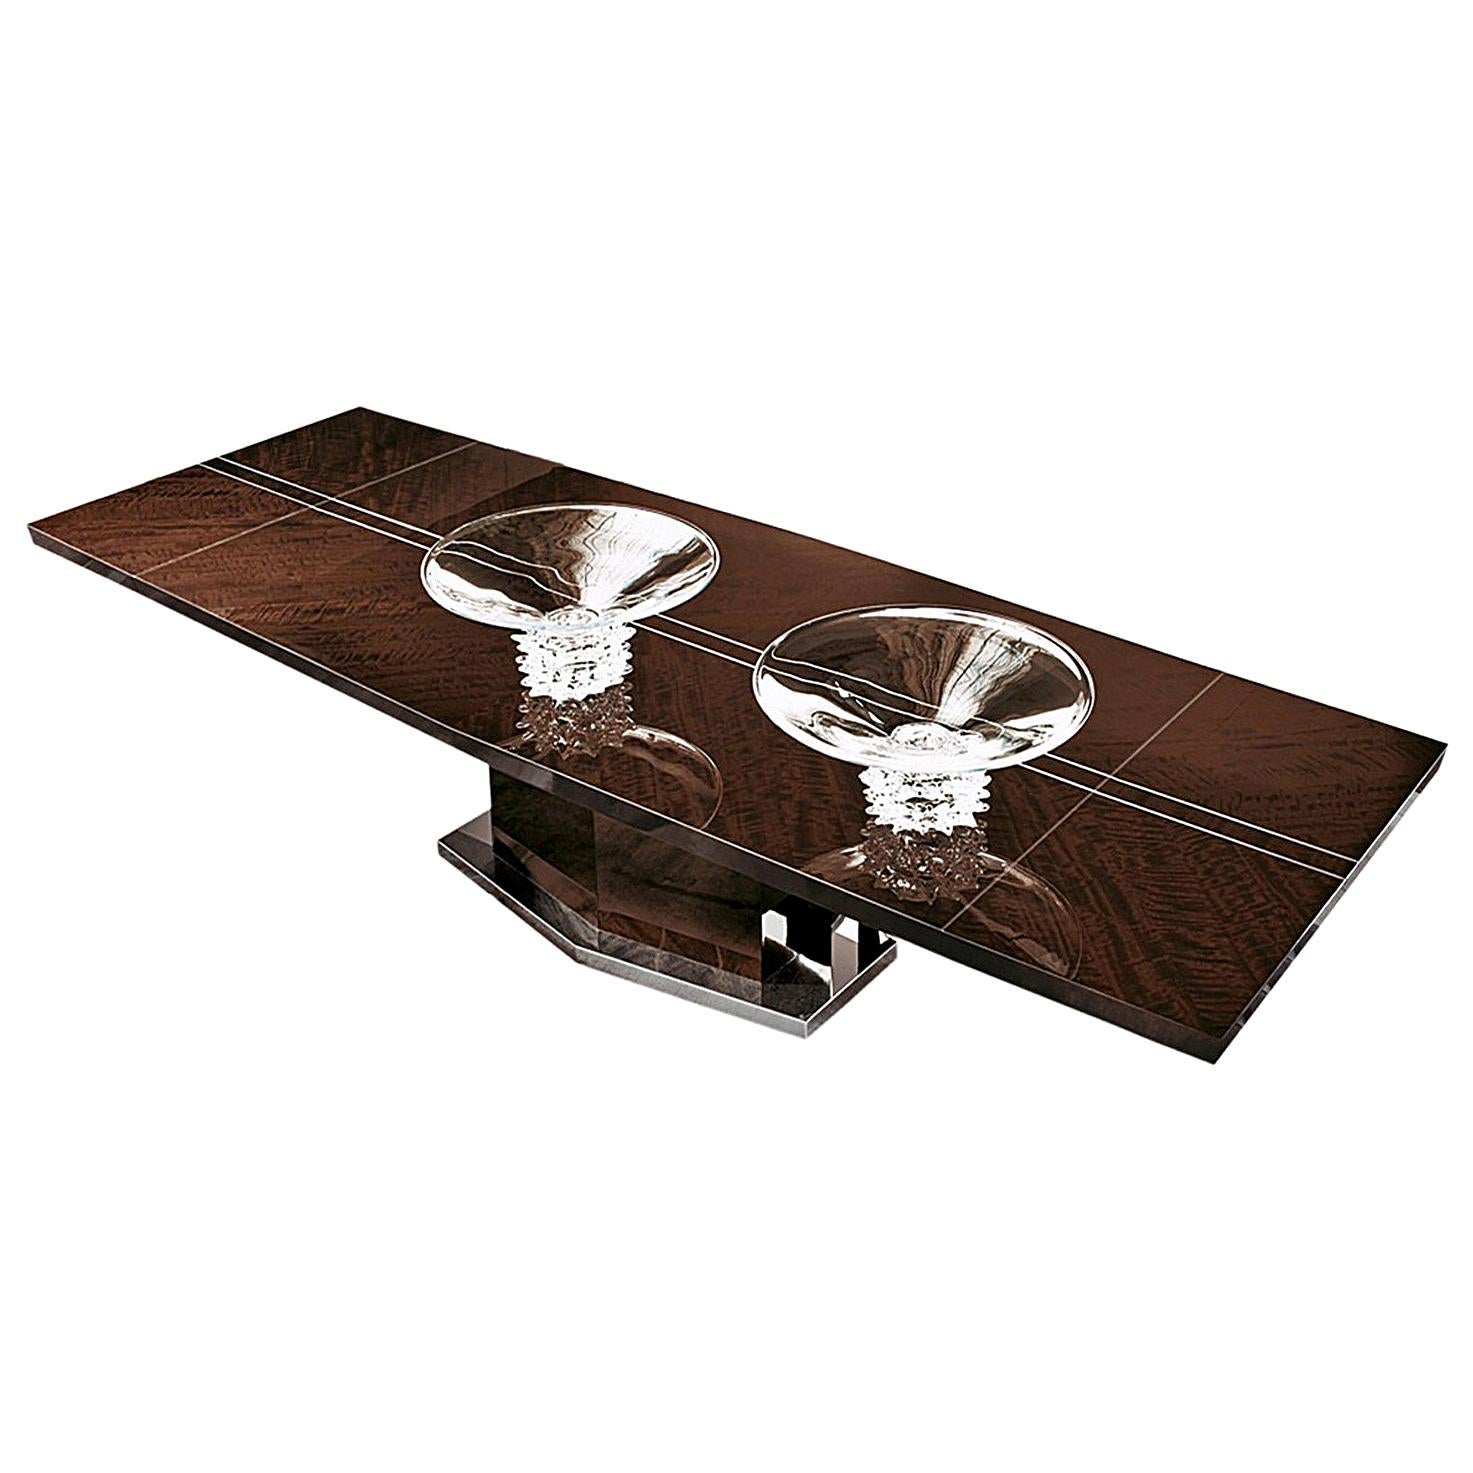 Rectangular table with two leaves rectangular
table with two extensions of cm 50 (19” 1/2), in European
curly eucalyptus veneer in high gloss polyester with 4 mm
chrome stainless steel filet in the top and leaves. Base in
chrome stainless